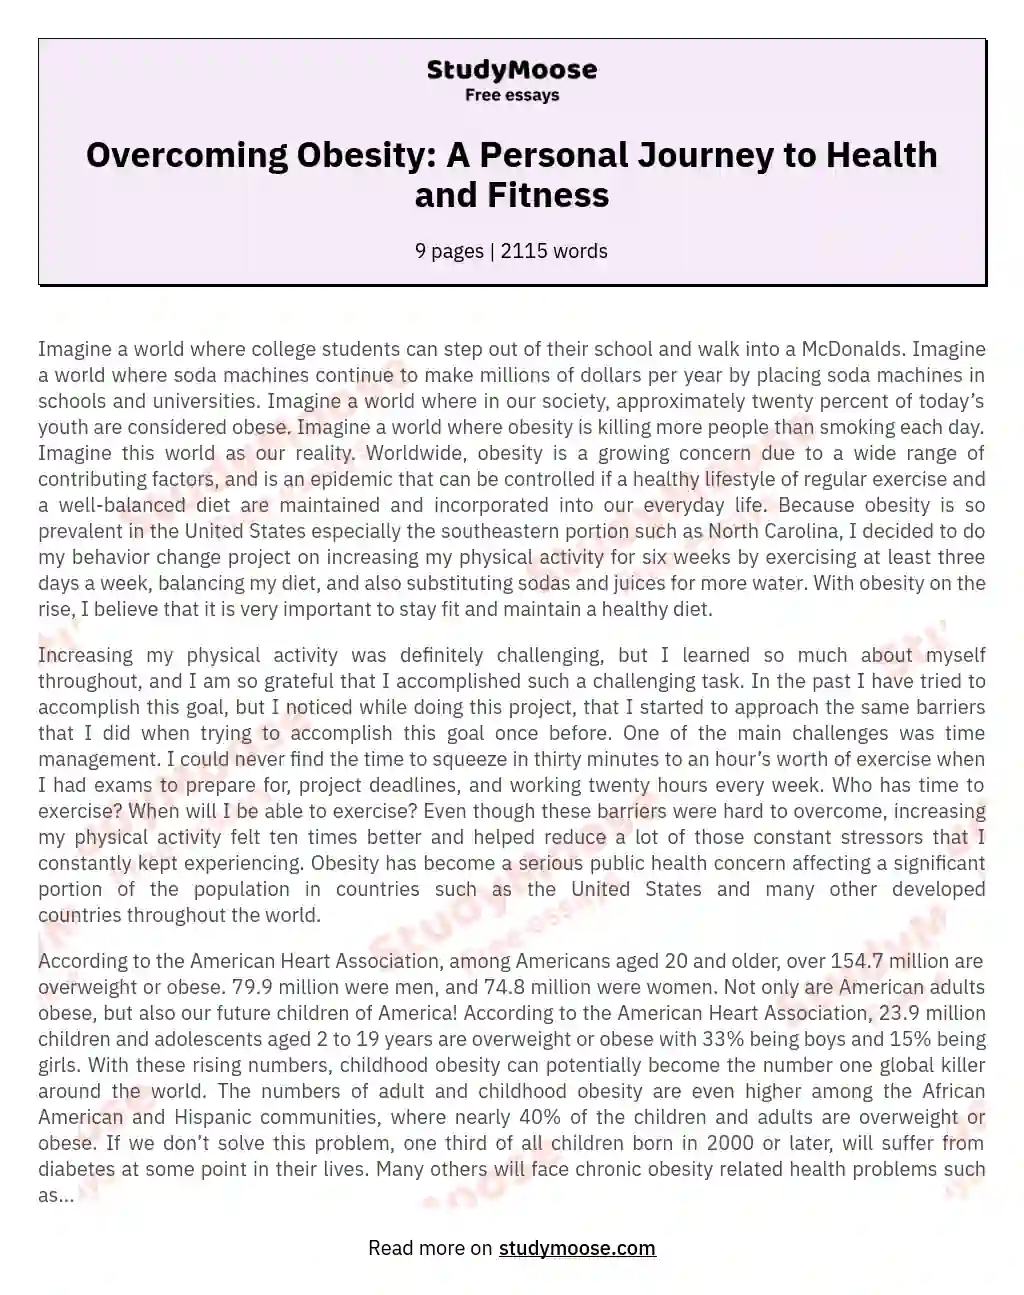 Overcoming Obesity: A Personal Journey to Health and Fitness essay